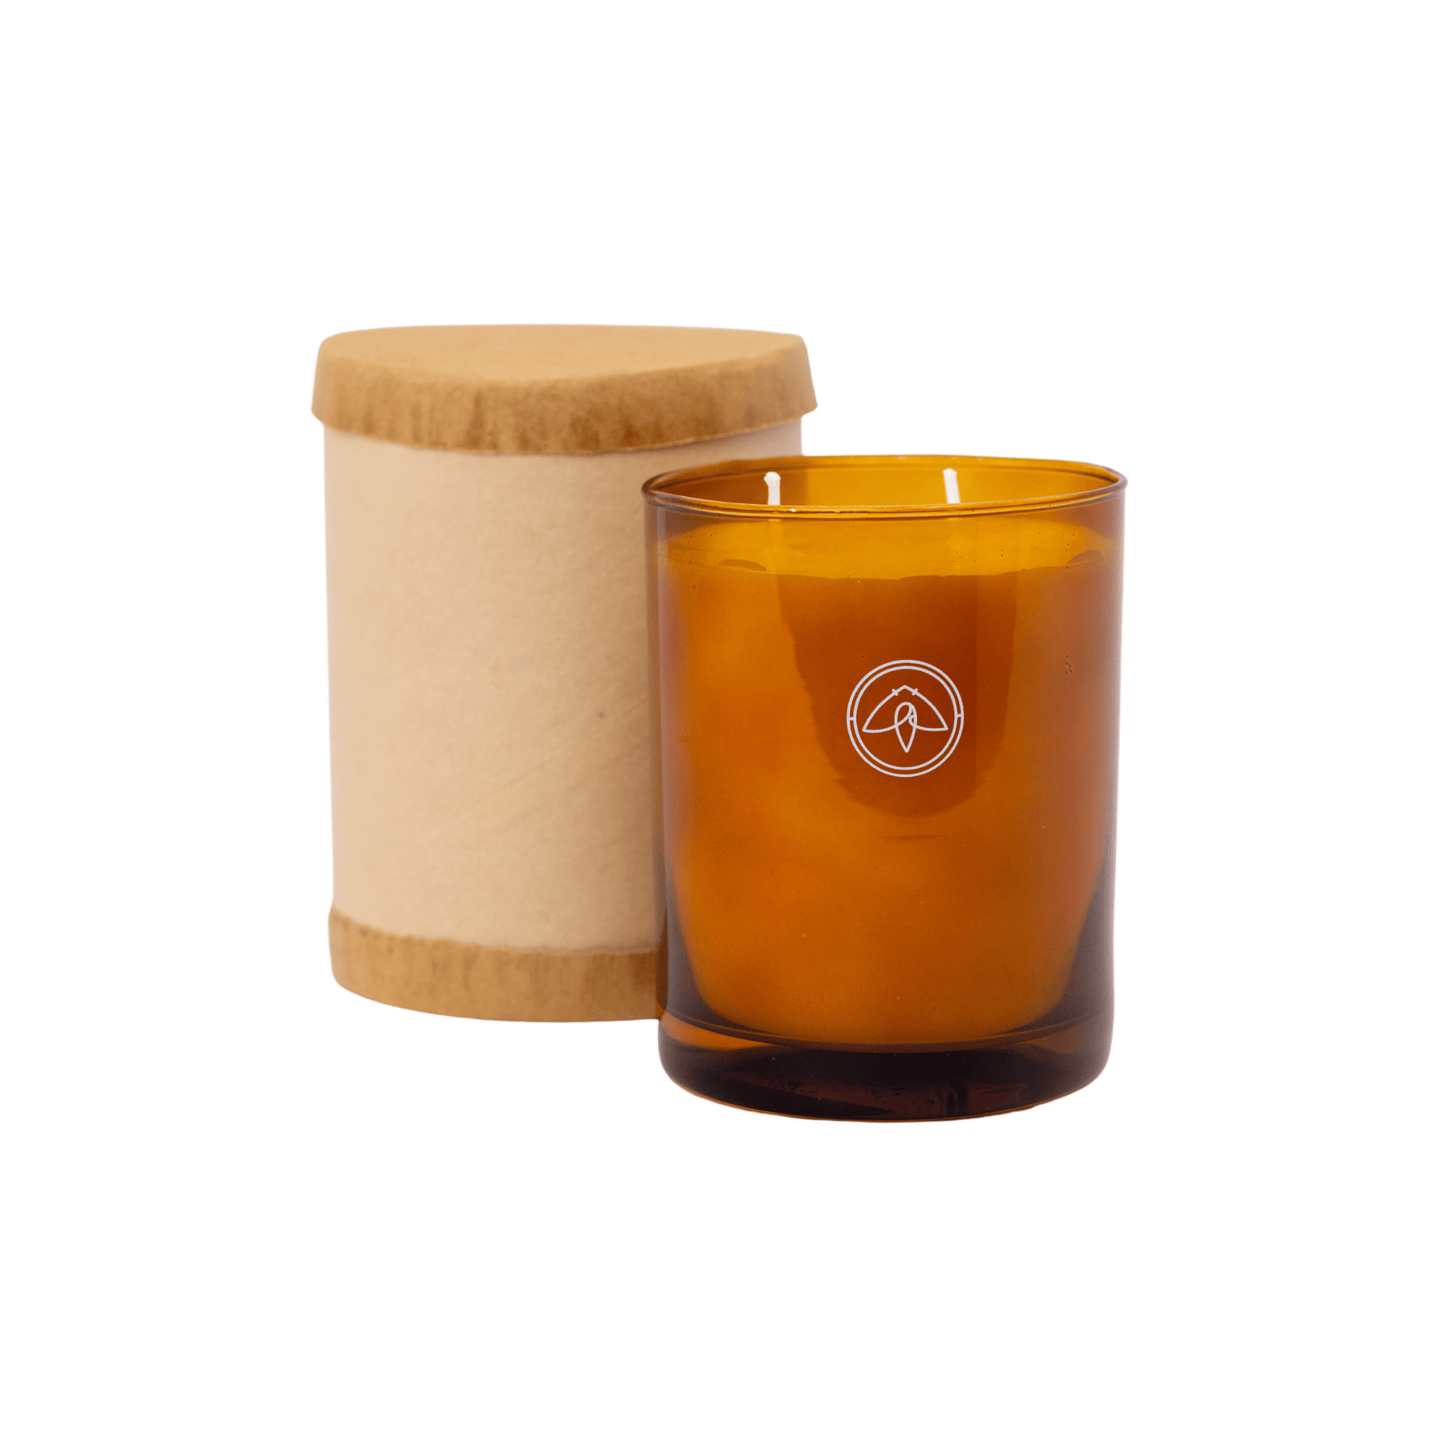 Products Glow 10oz. Candle - Vintage Leather unlit candle with cylinder packaging on white background